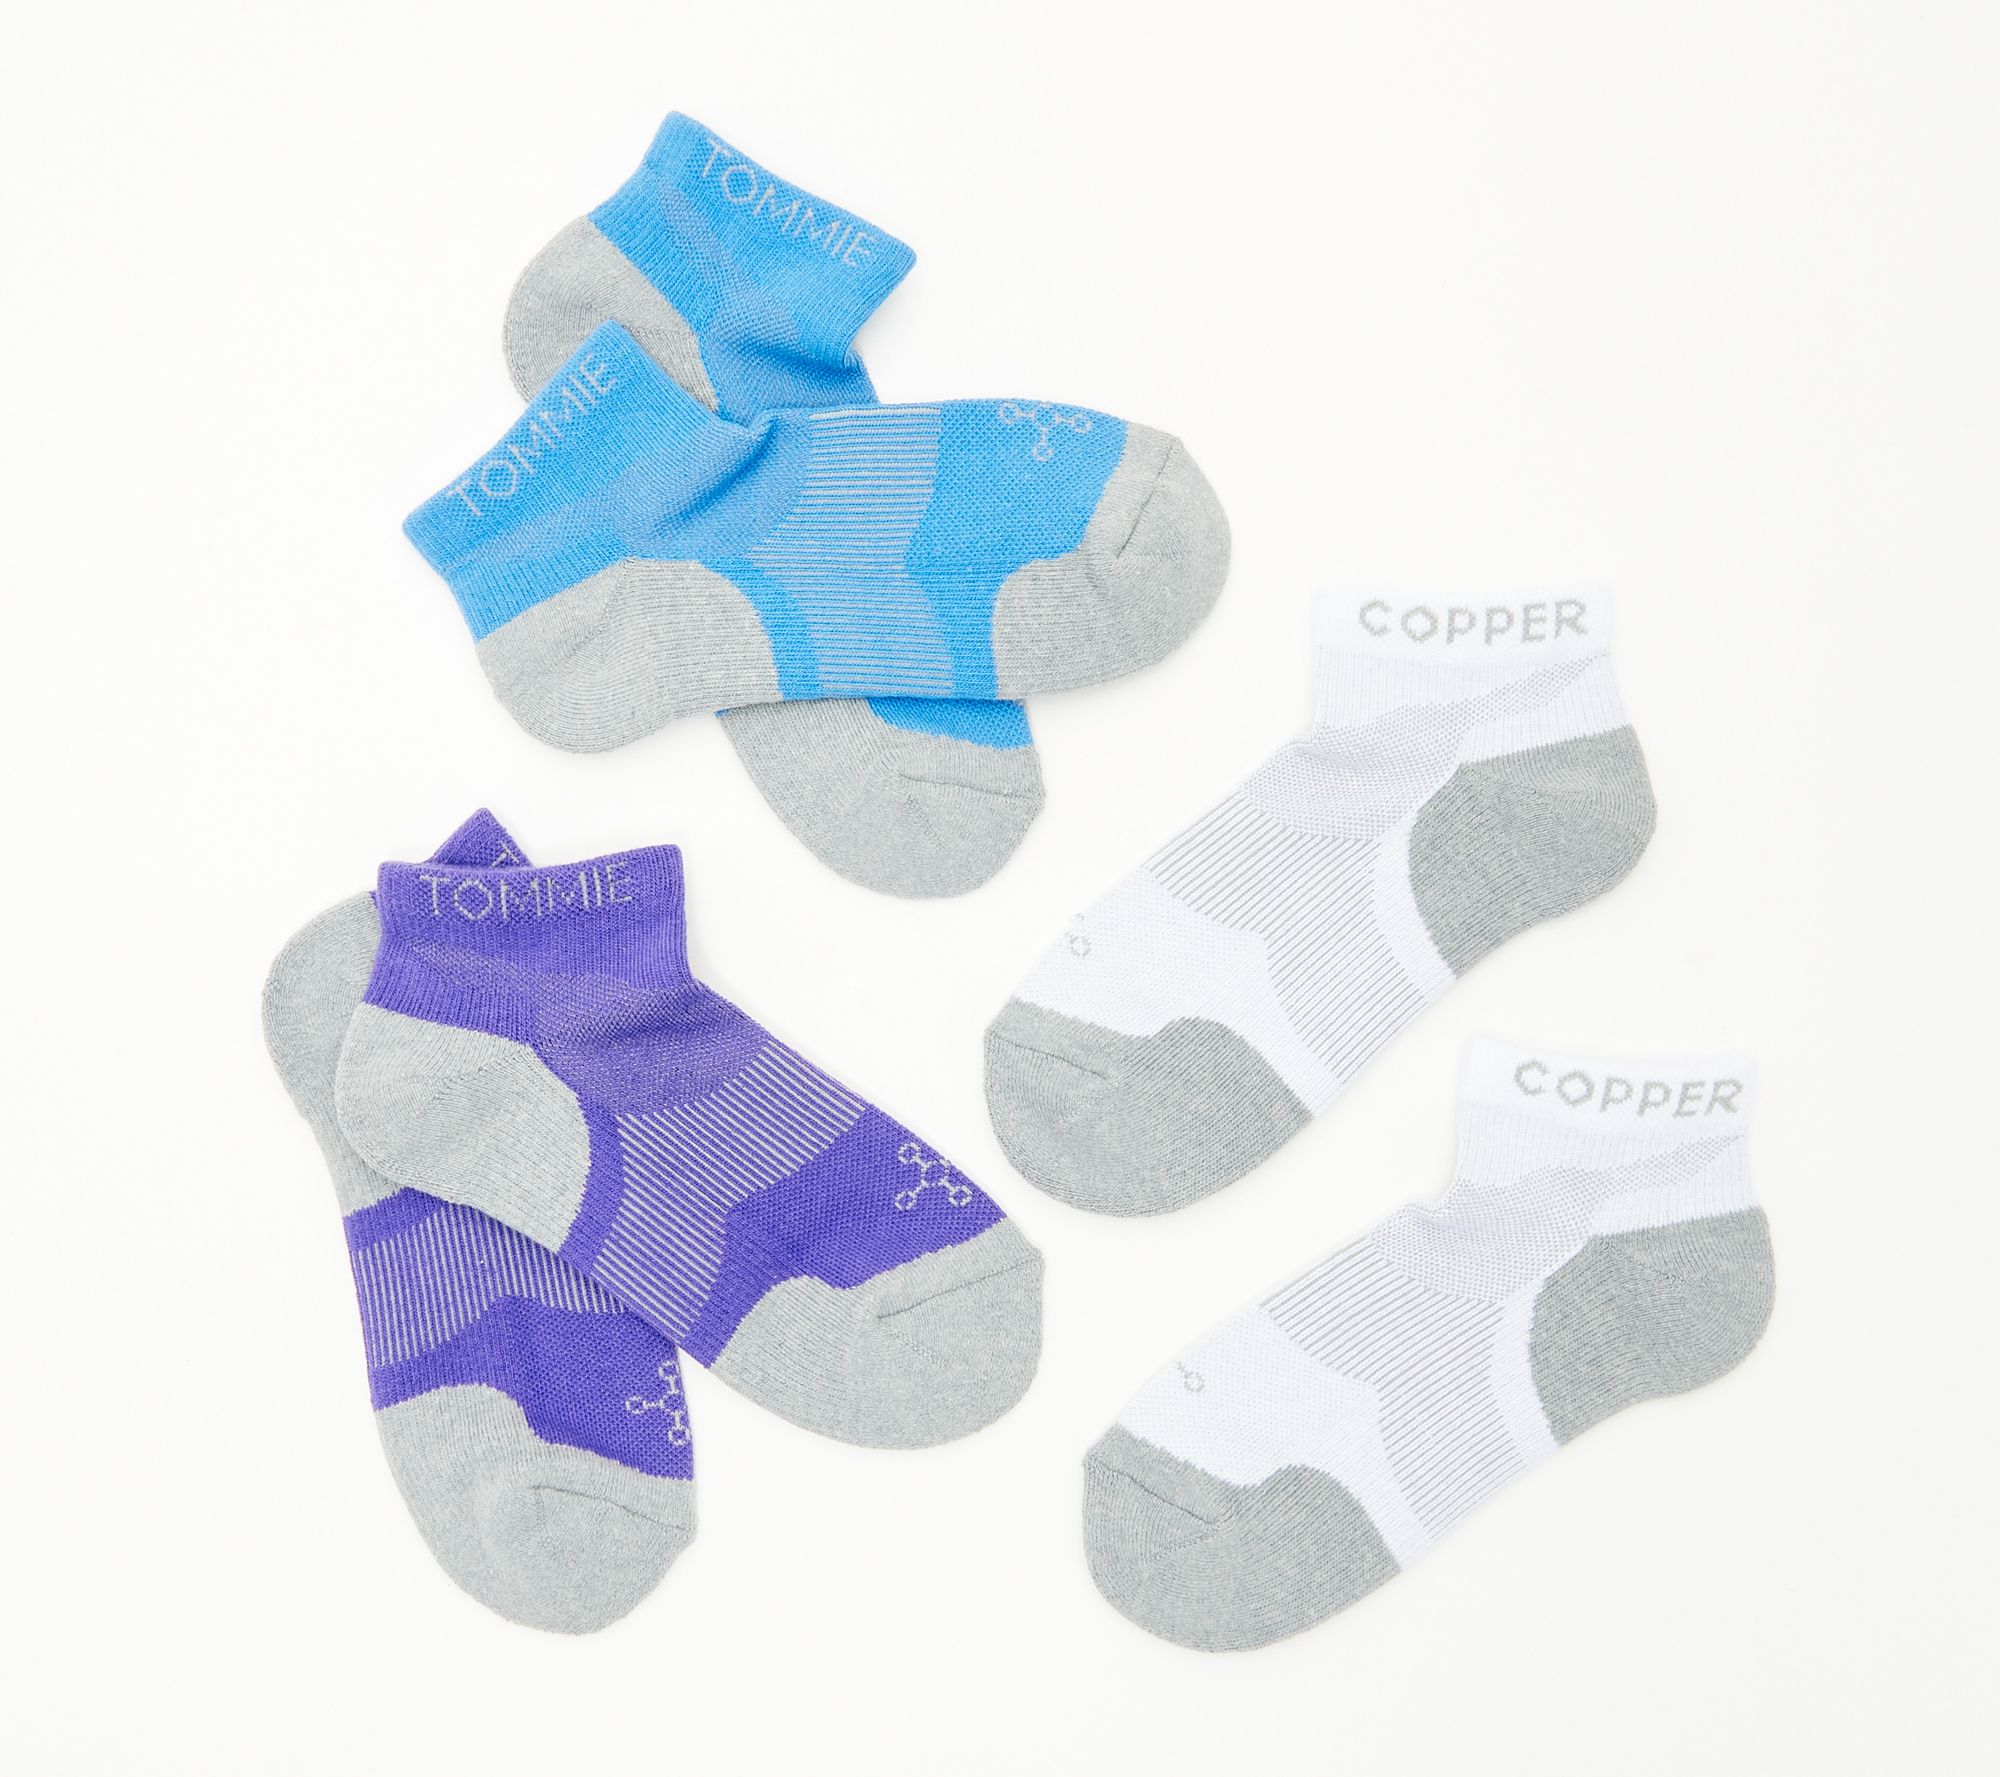 Tommie Copper 3-Pack Compression Ankle Socks - QVC.com